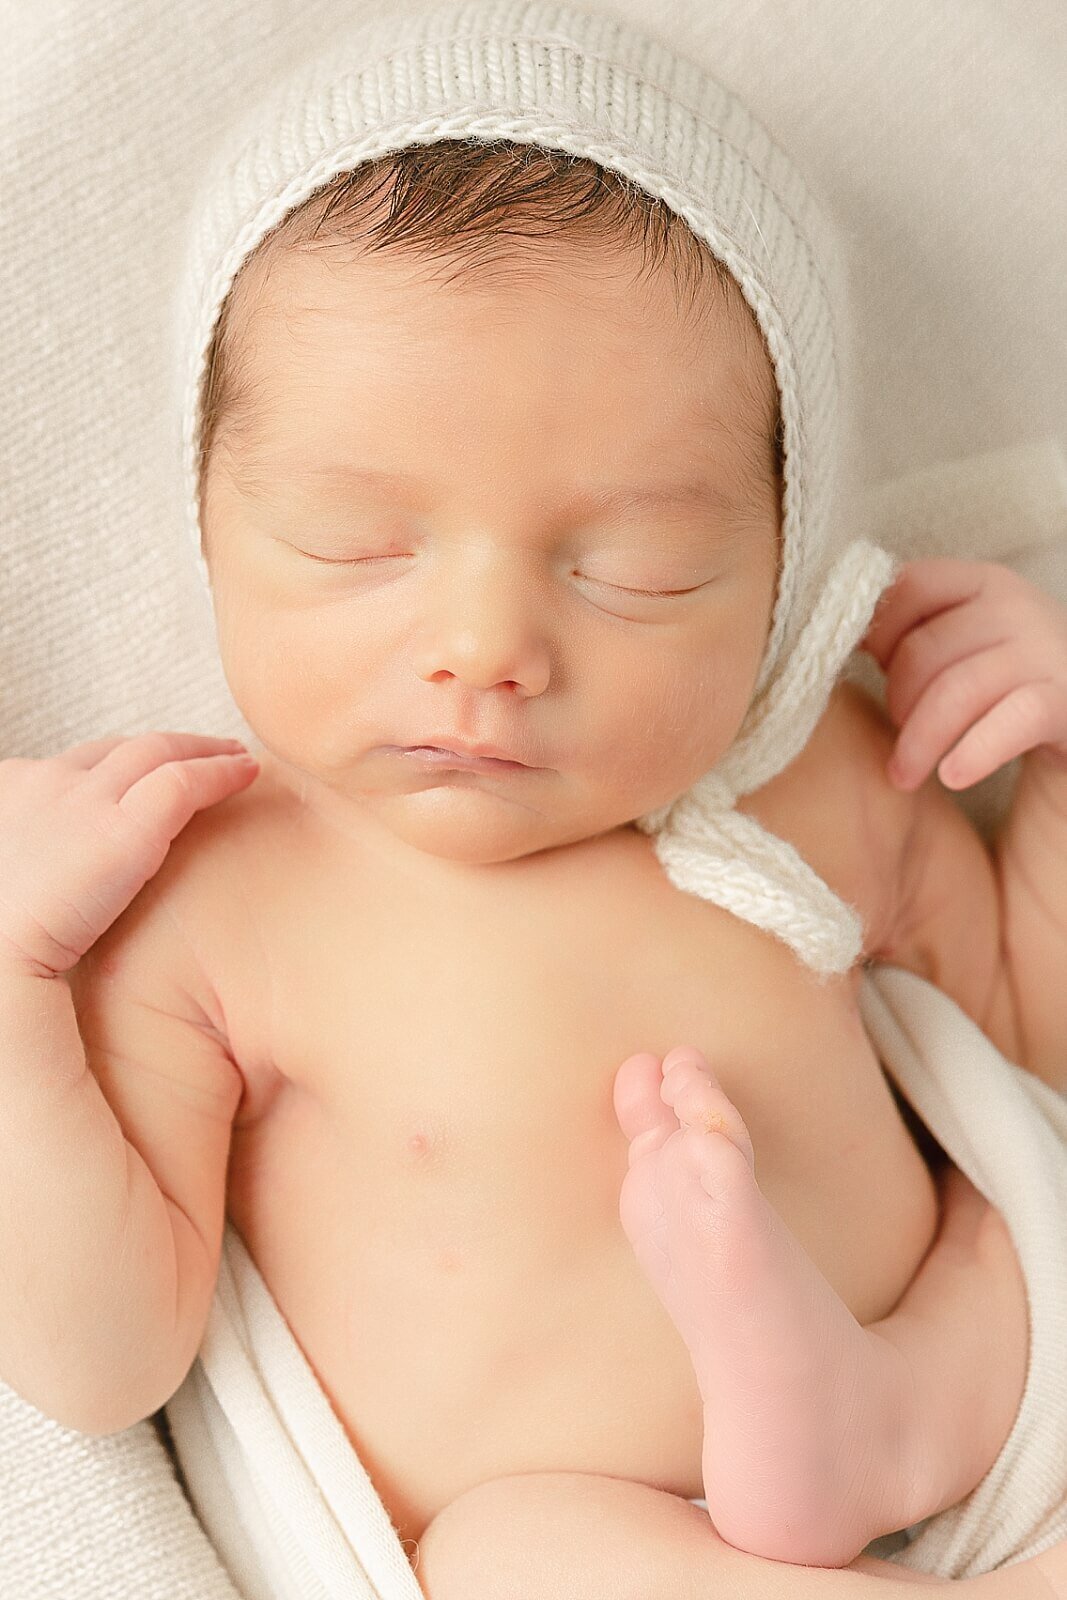 baby boy with white bonnet on and foot on chest